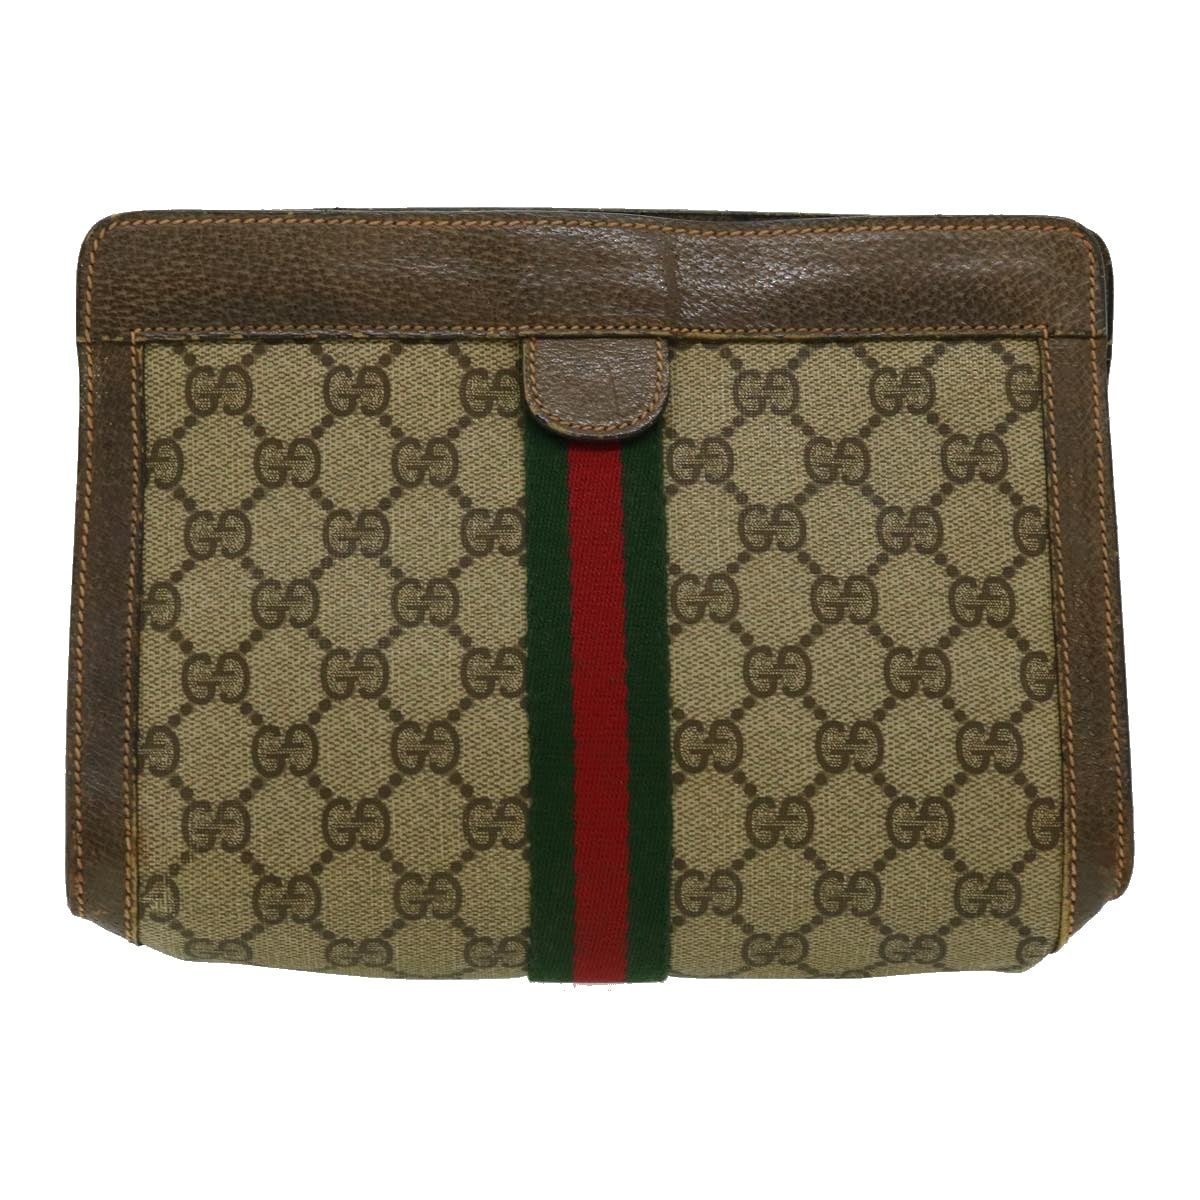 GUCCI GG Canvas Web Sherry Line Clutch Bag Beige Green Red Auth th2821 - 0